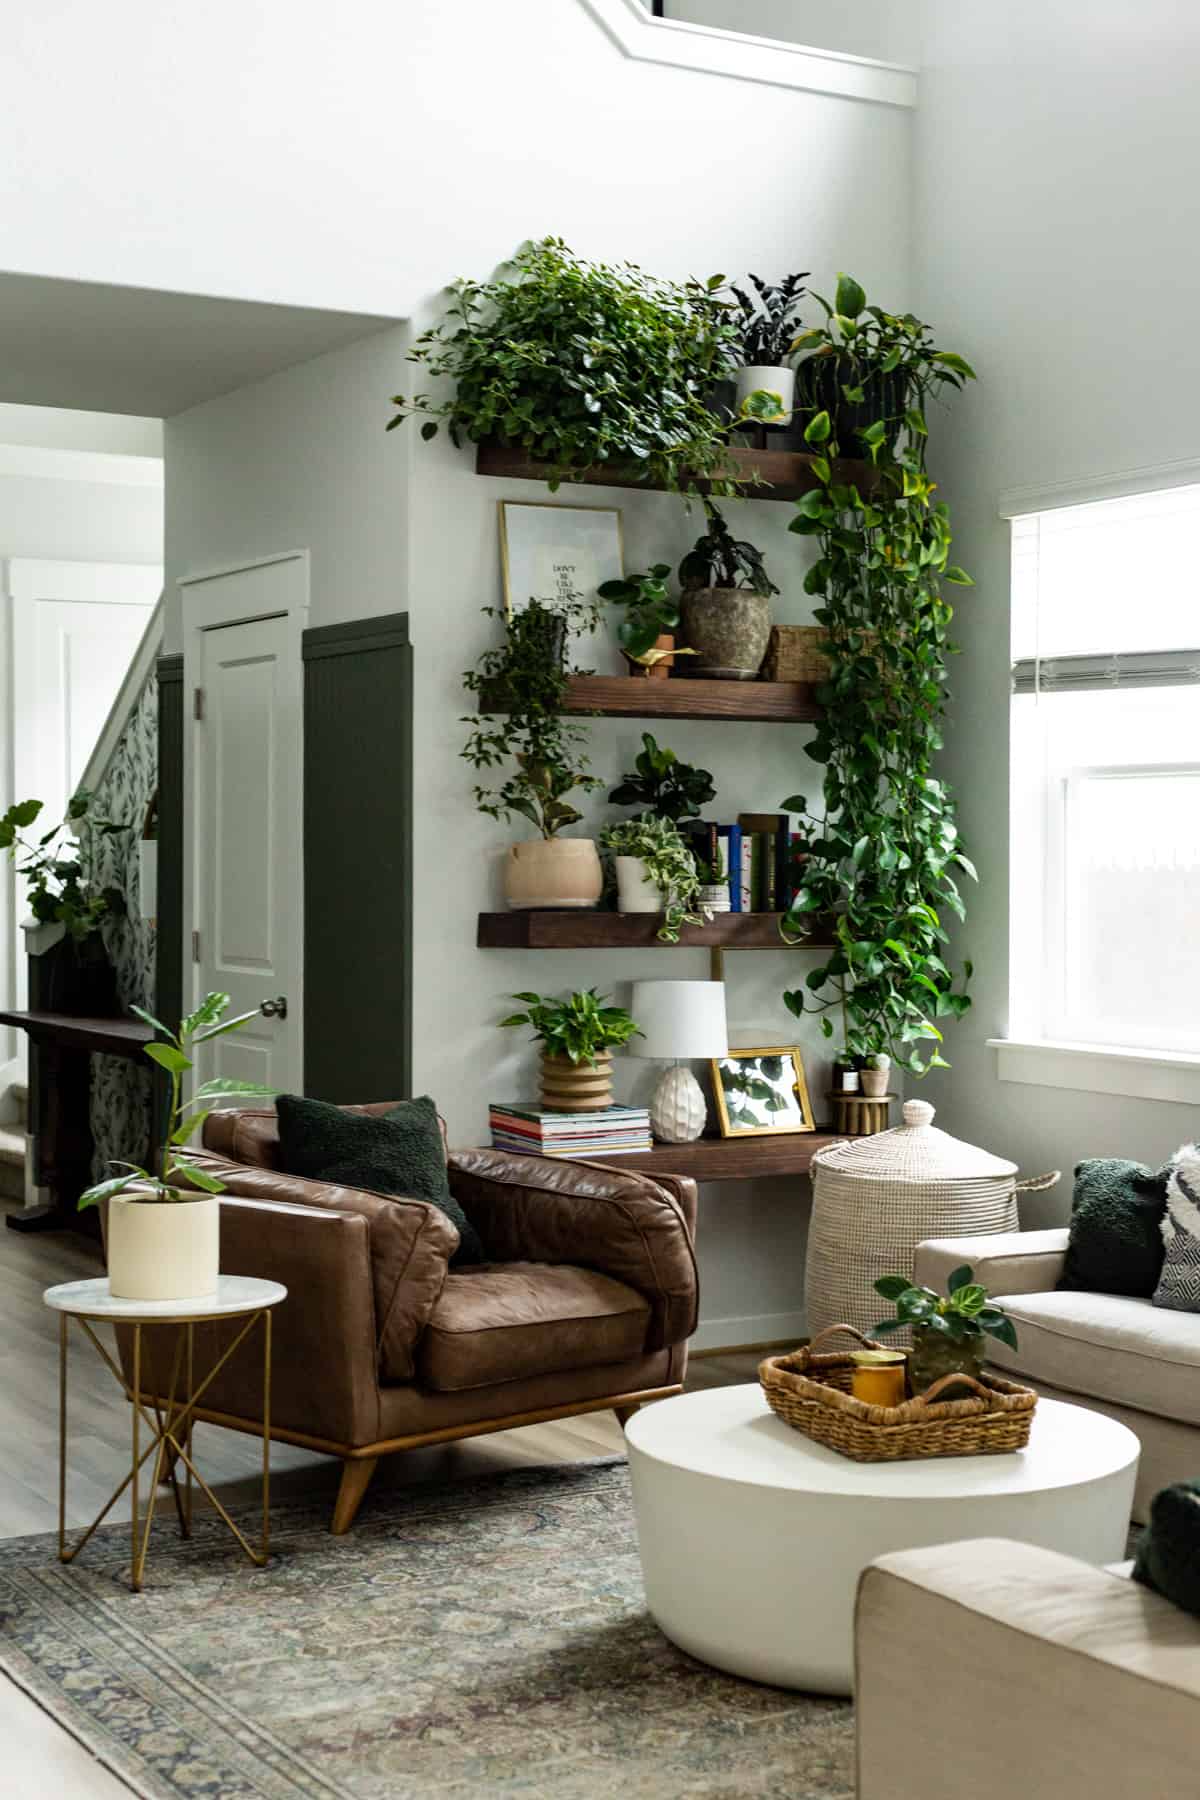 Living Room Decorating Ideas With Plants Cabinets Matttroy